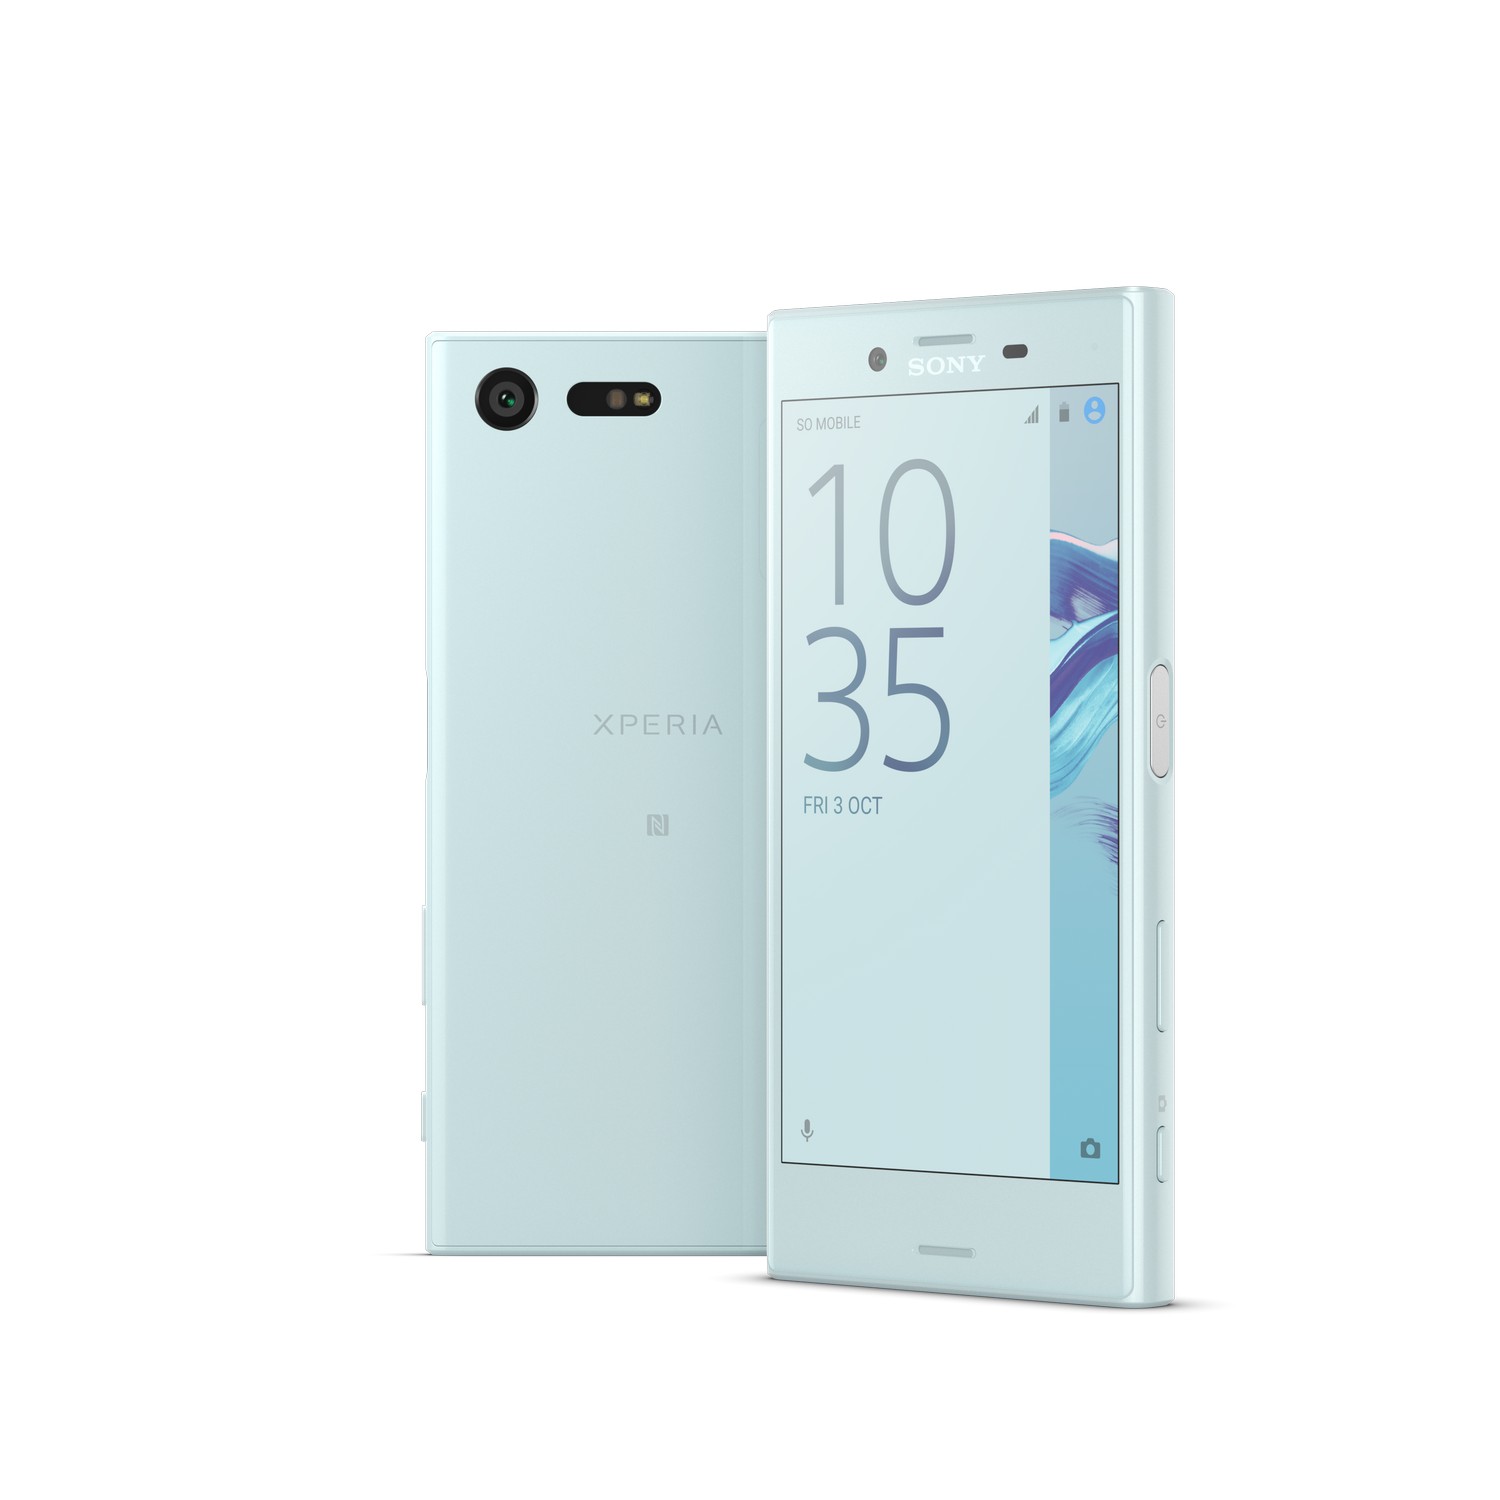 Sony-Xperia-X-Compact (1)